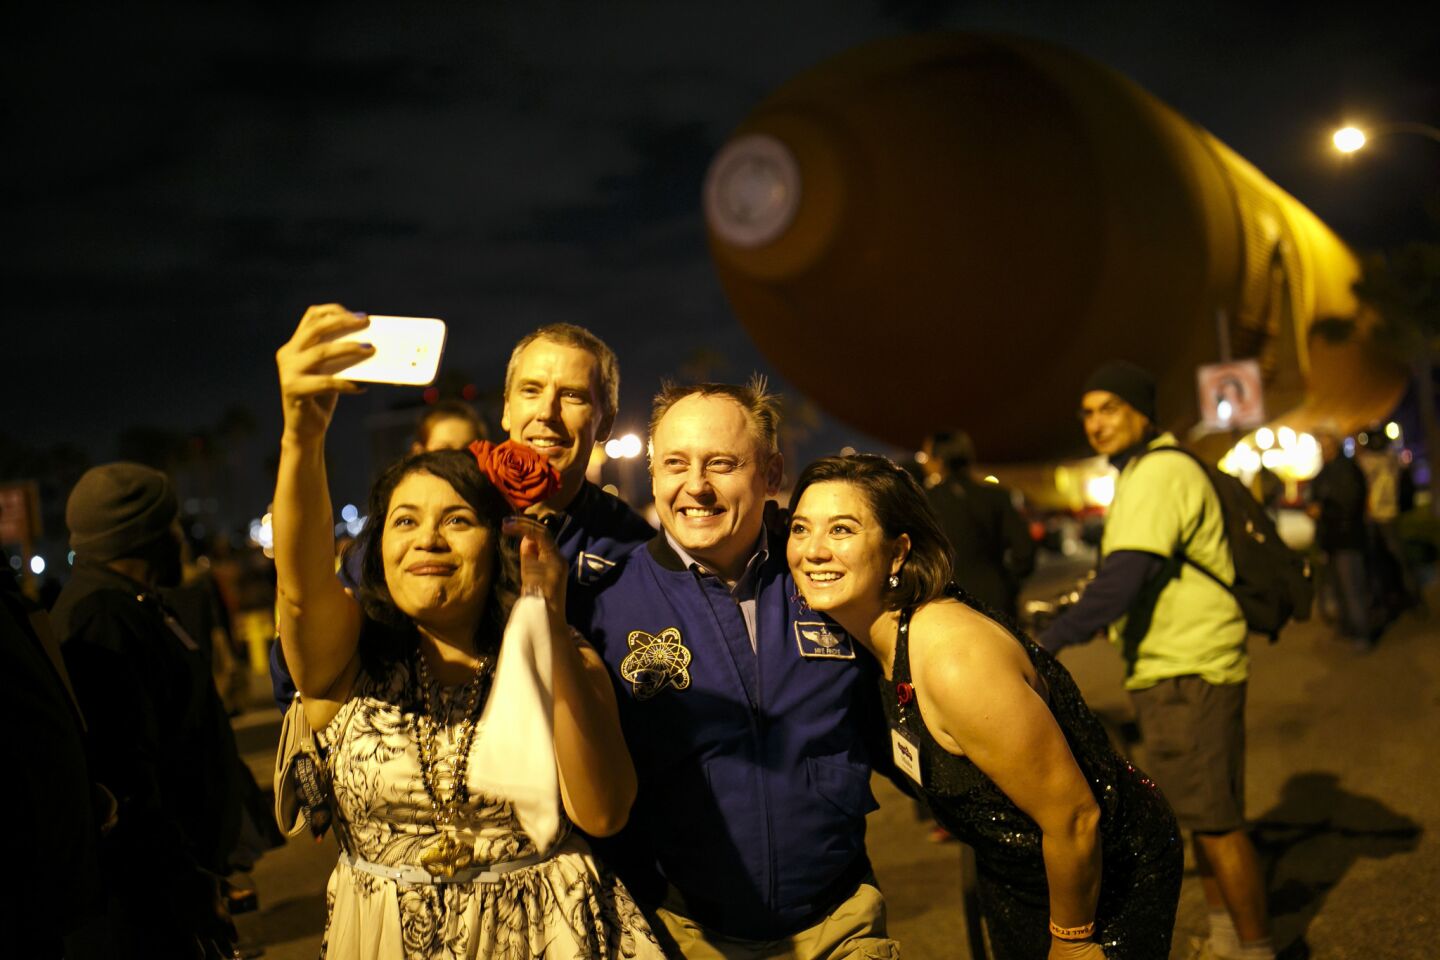 Space shuttle fans pose with astronauts Andrew J. Feustel, left, and Mike Fincke, center, as the last fuel tank moves along L.A. city streets to Exposition Park.